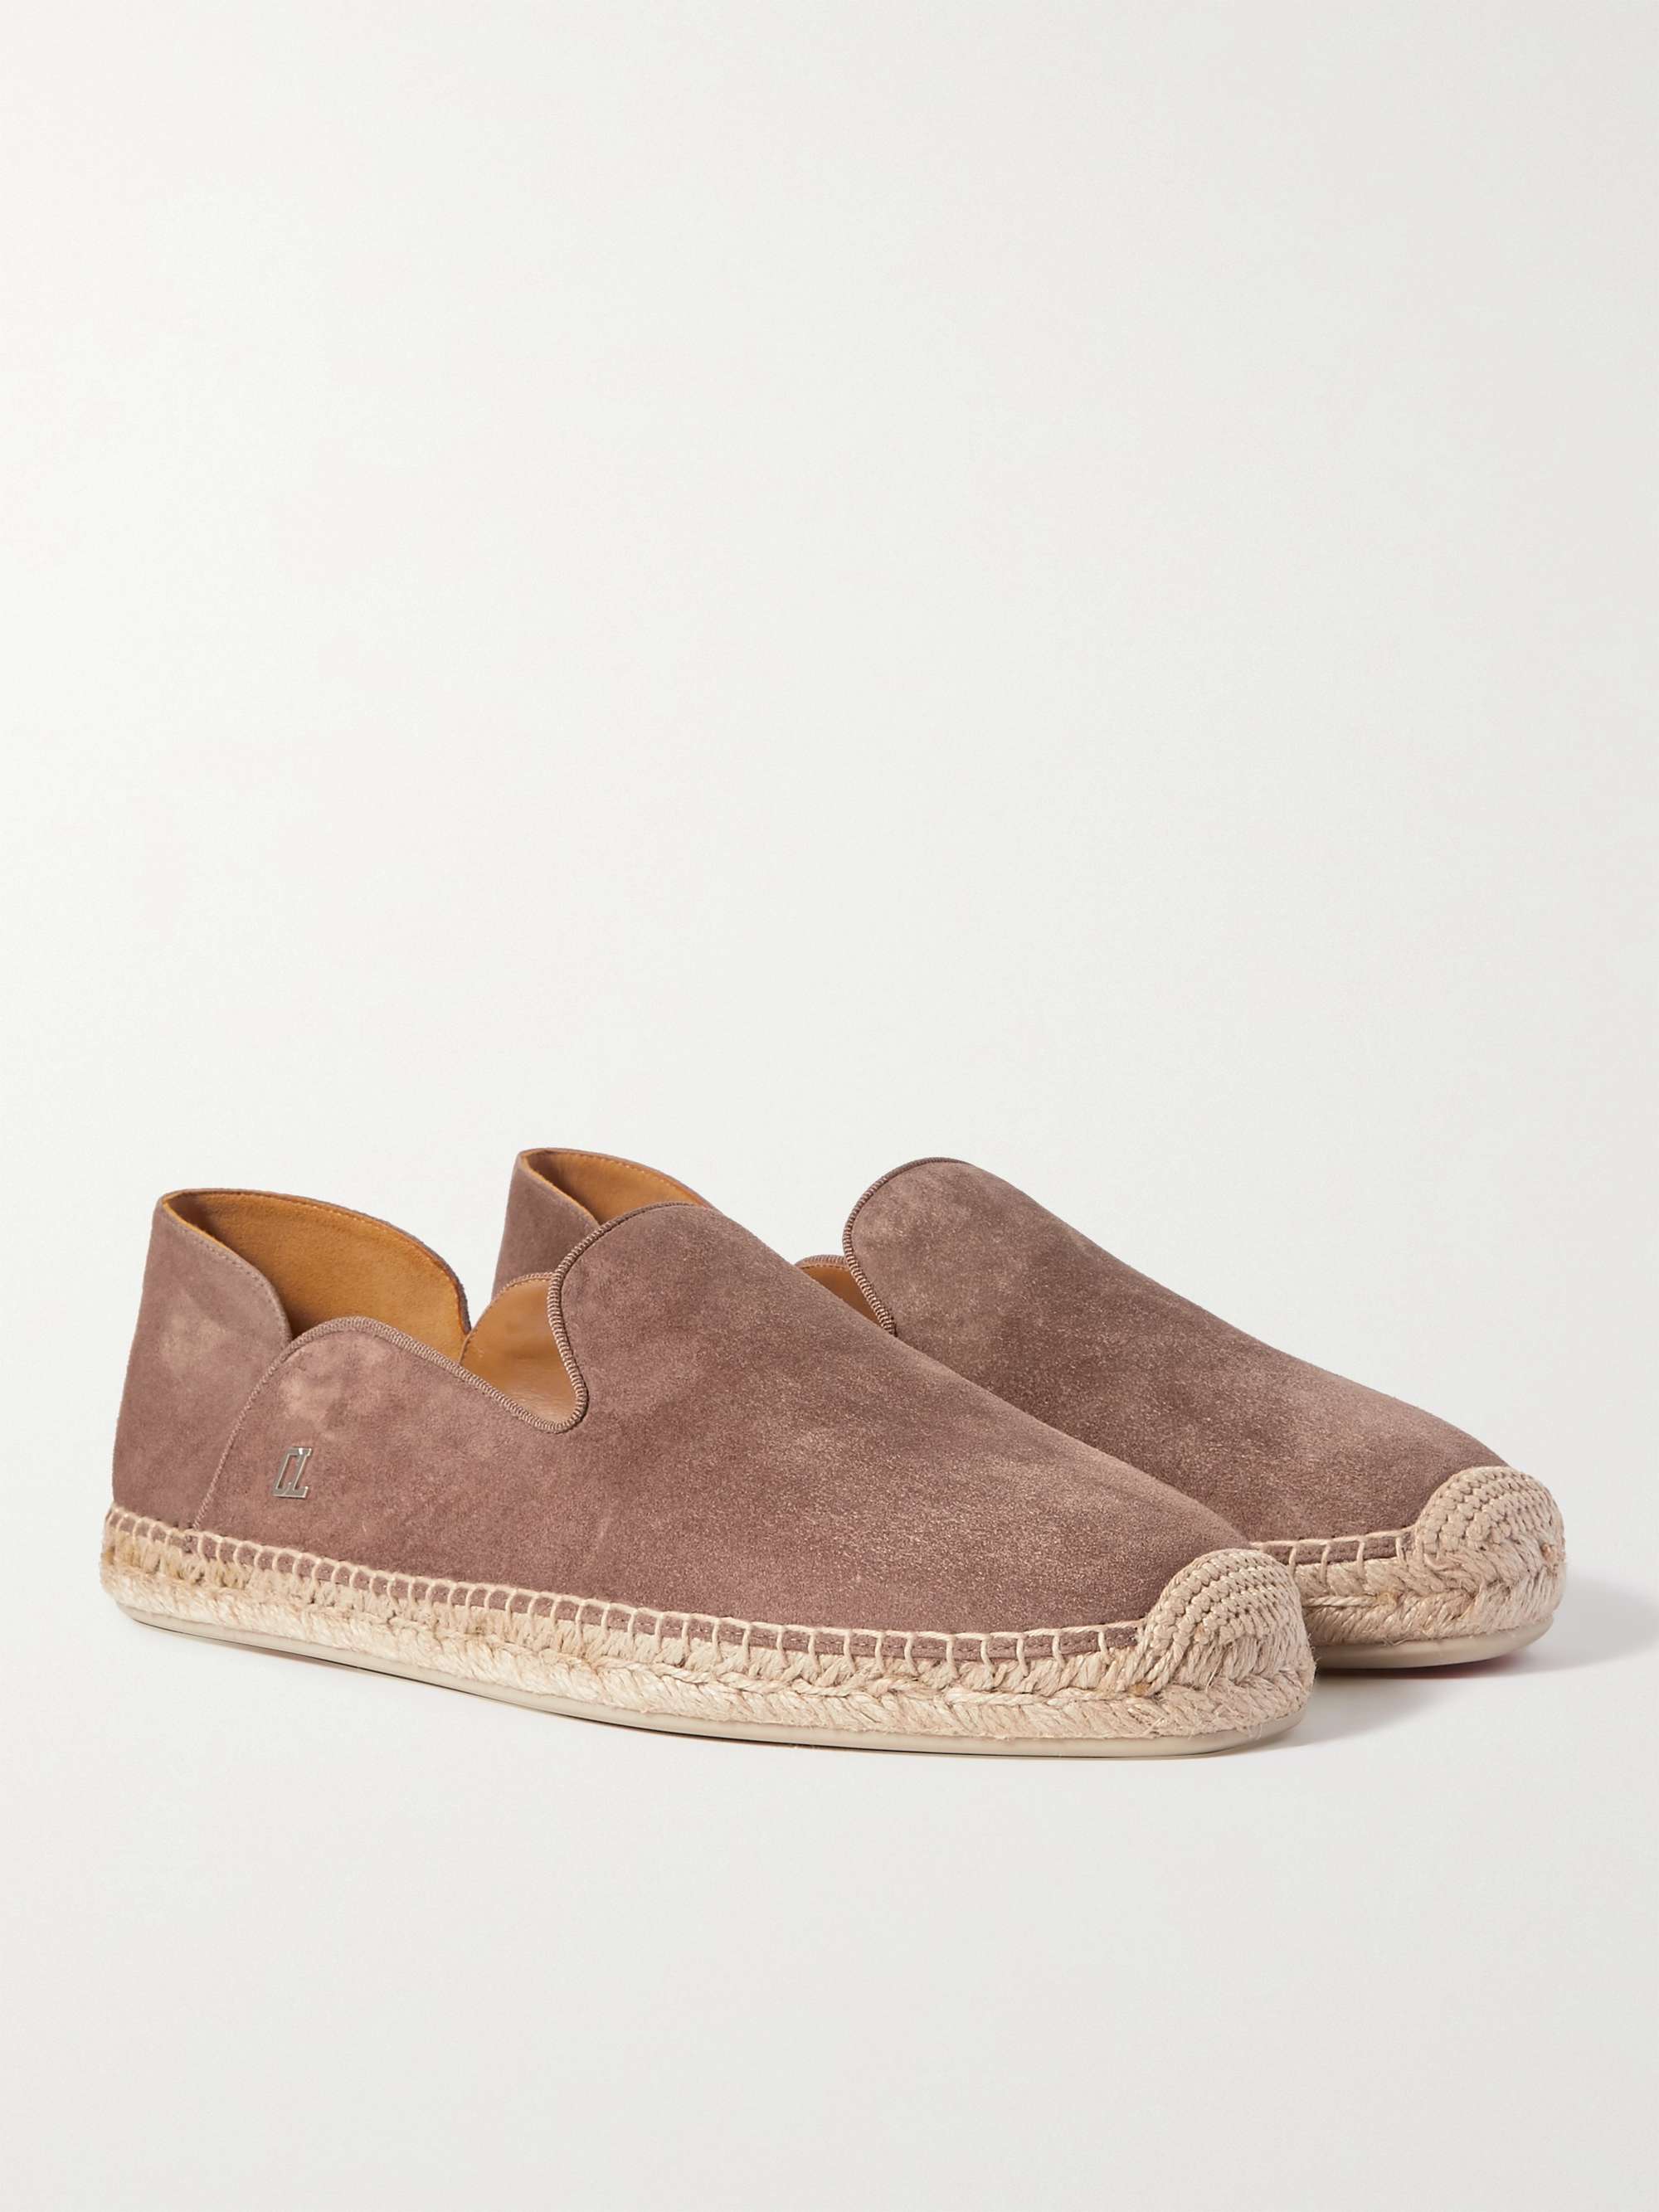 CHRISTIAN LOUBOUTIN Collapsible-Heel Suede Espadrilles